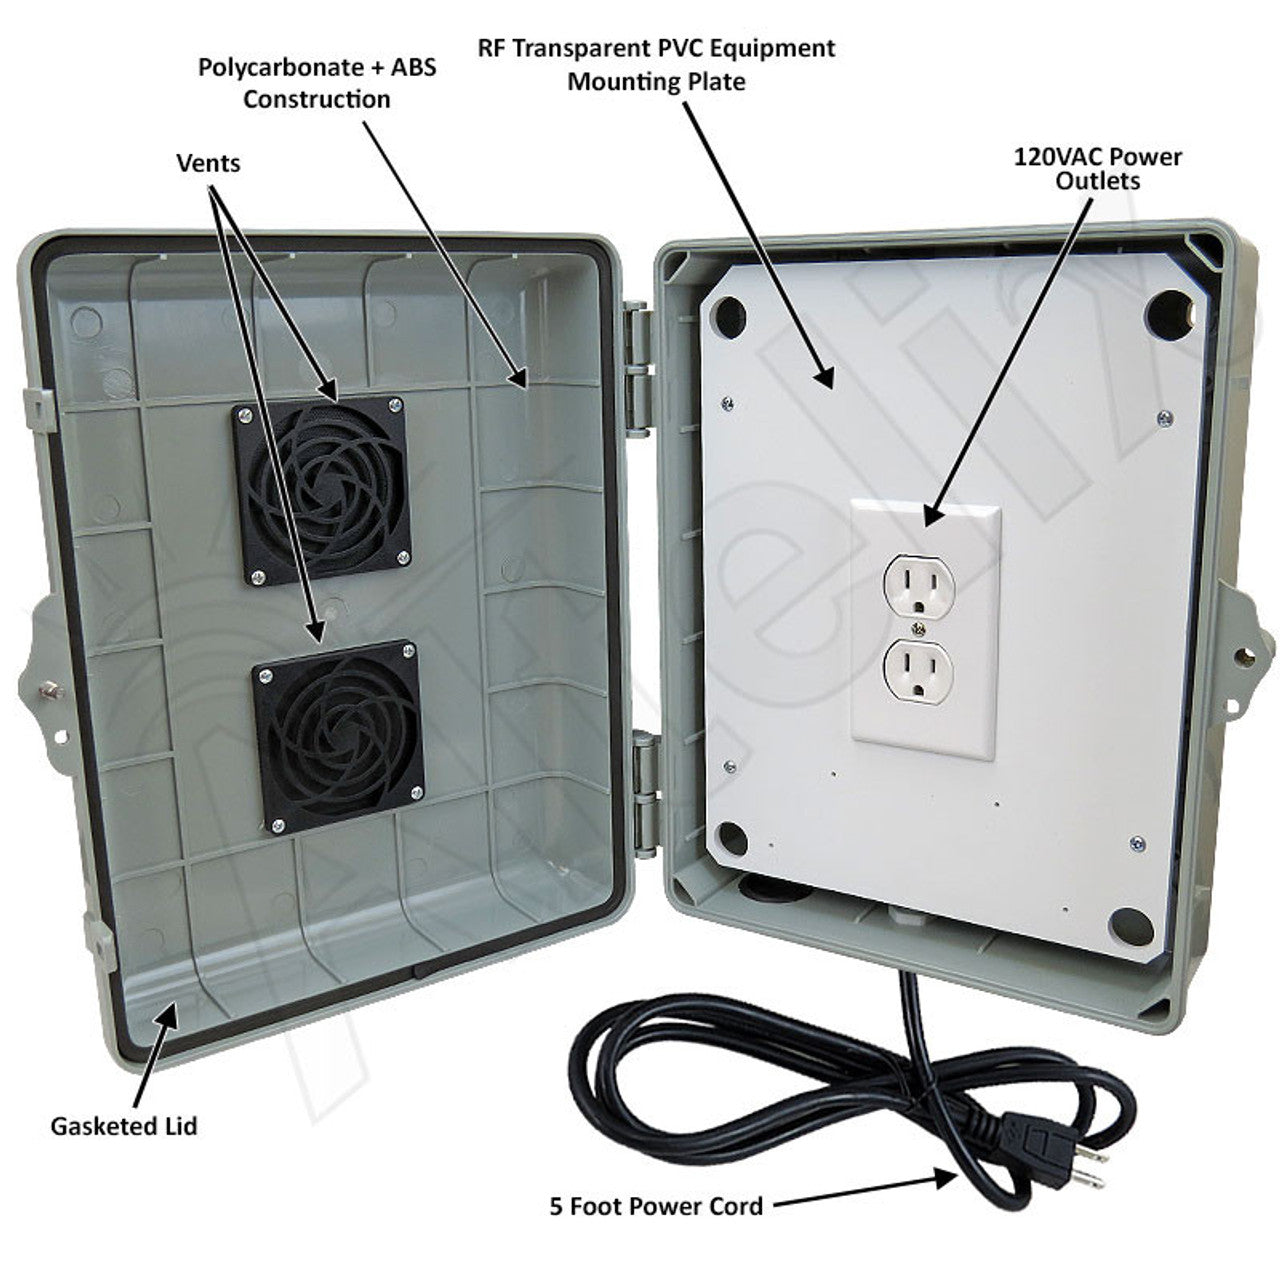 Altelix Weatherproof Vented WiFi Enclosure with No-Drill Equipment Mounting Plate, 120VAC Outlets and Power Cord